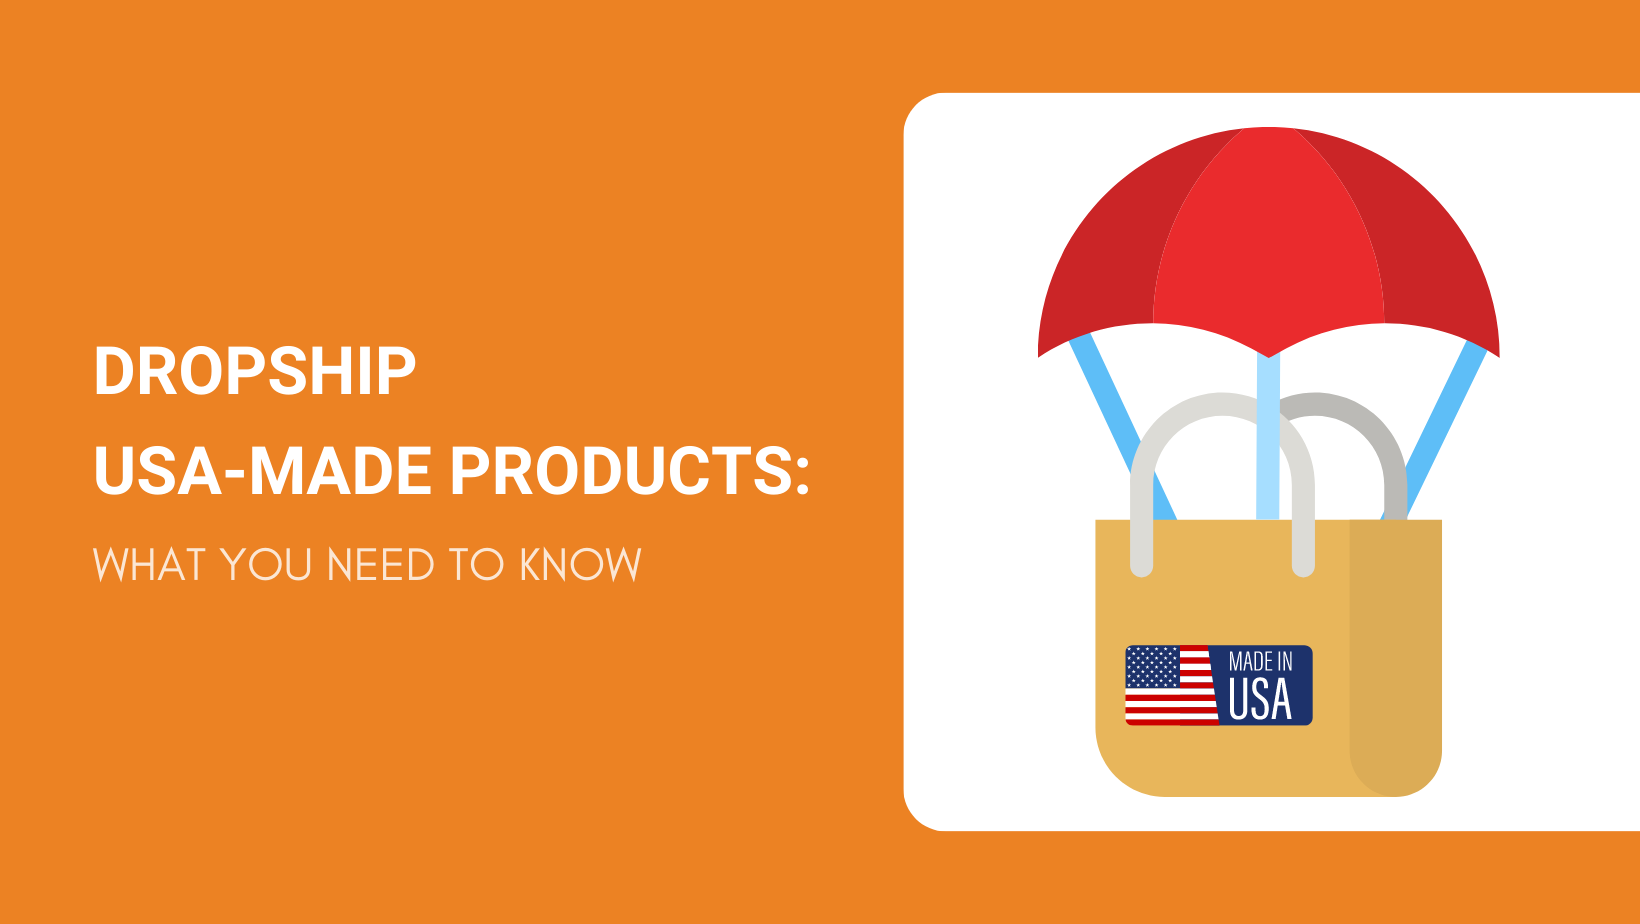 DROPSHIP USA-MADE PRODUCTS WHAT YOU NEED TO KNOW